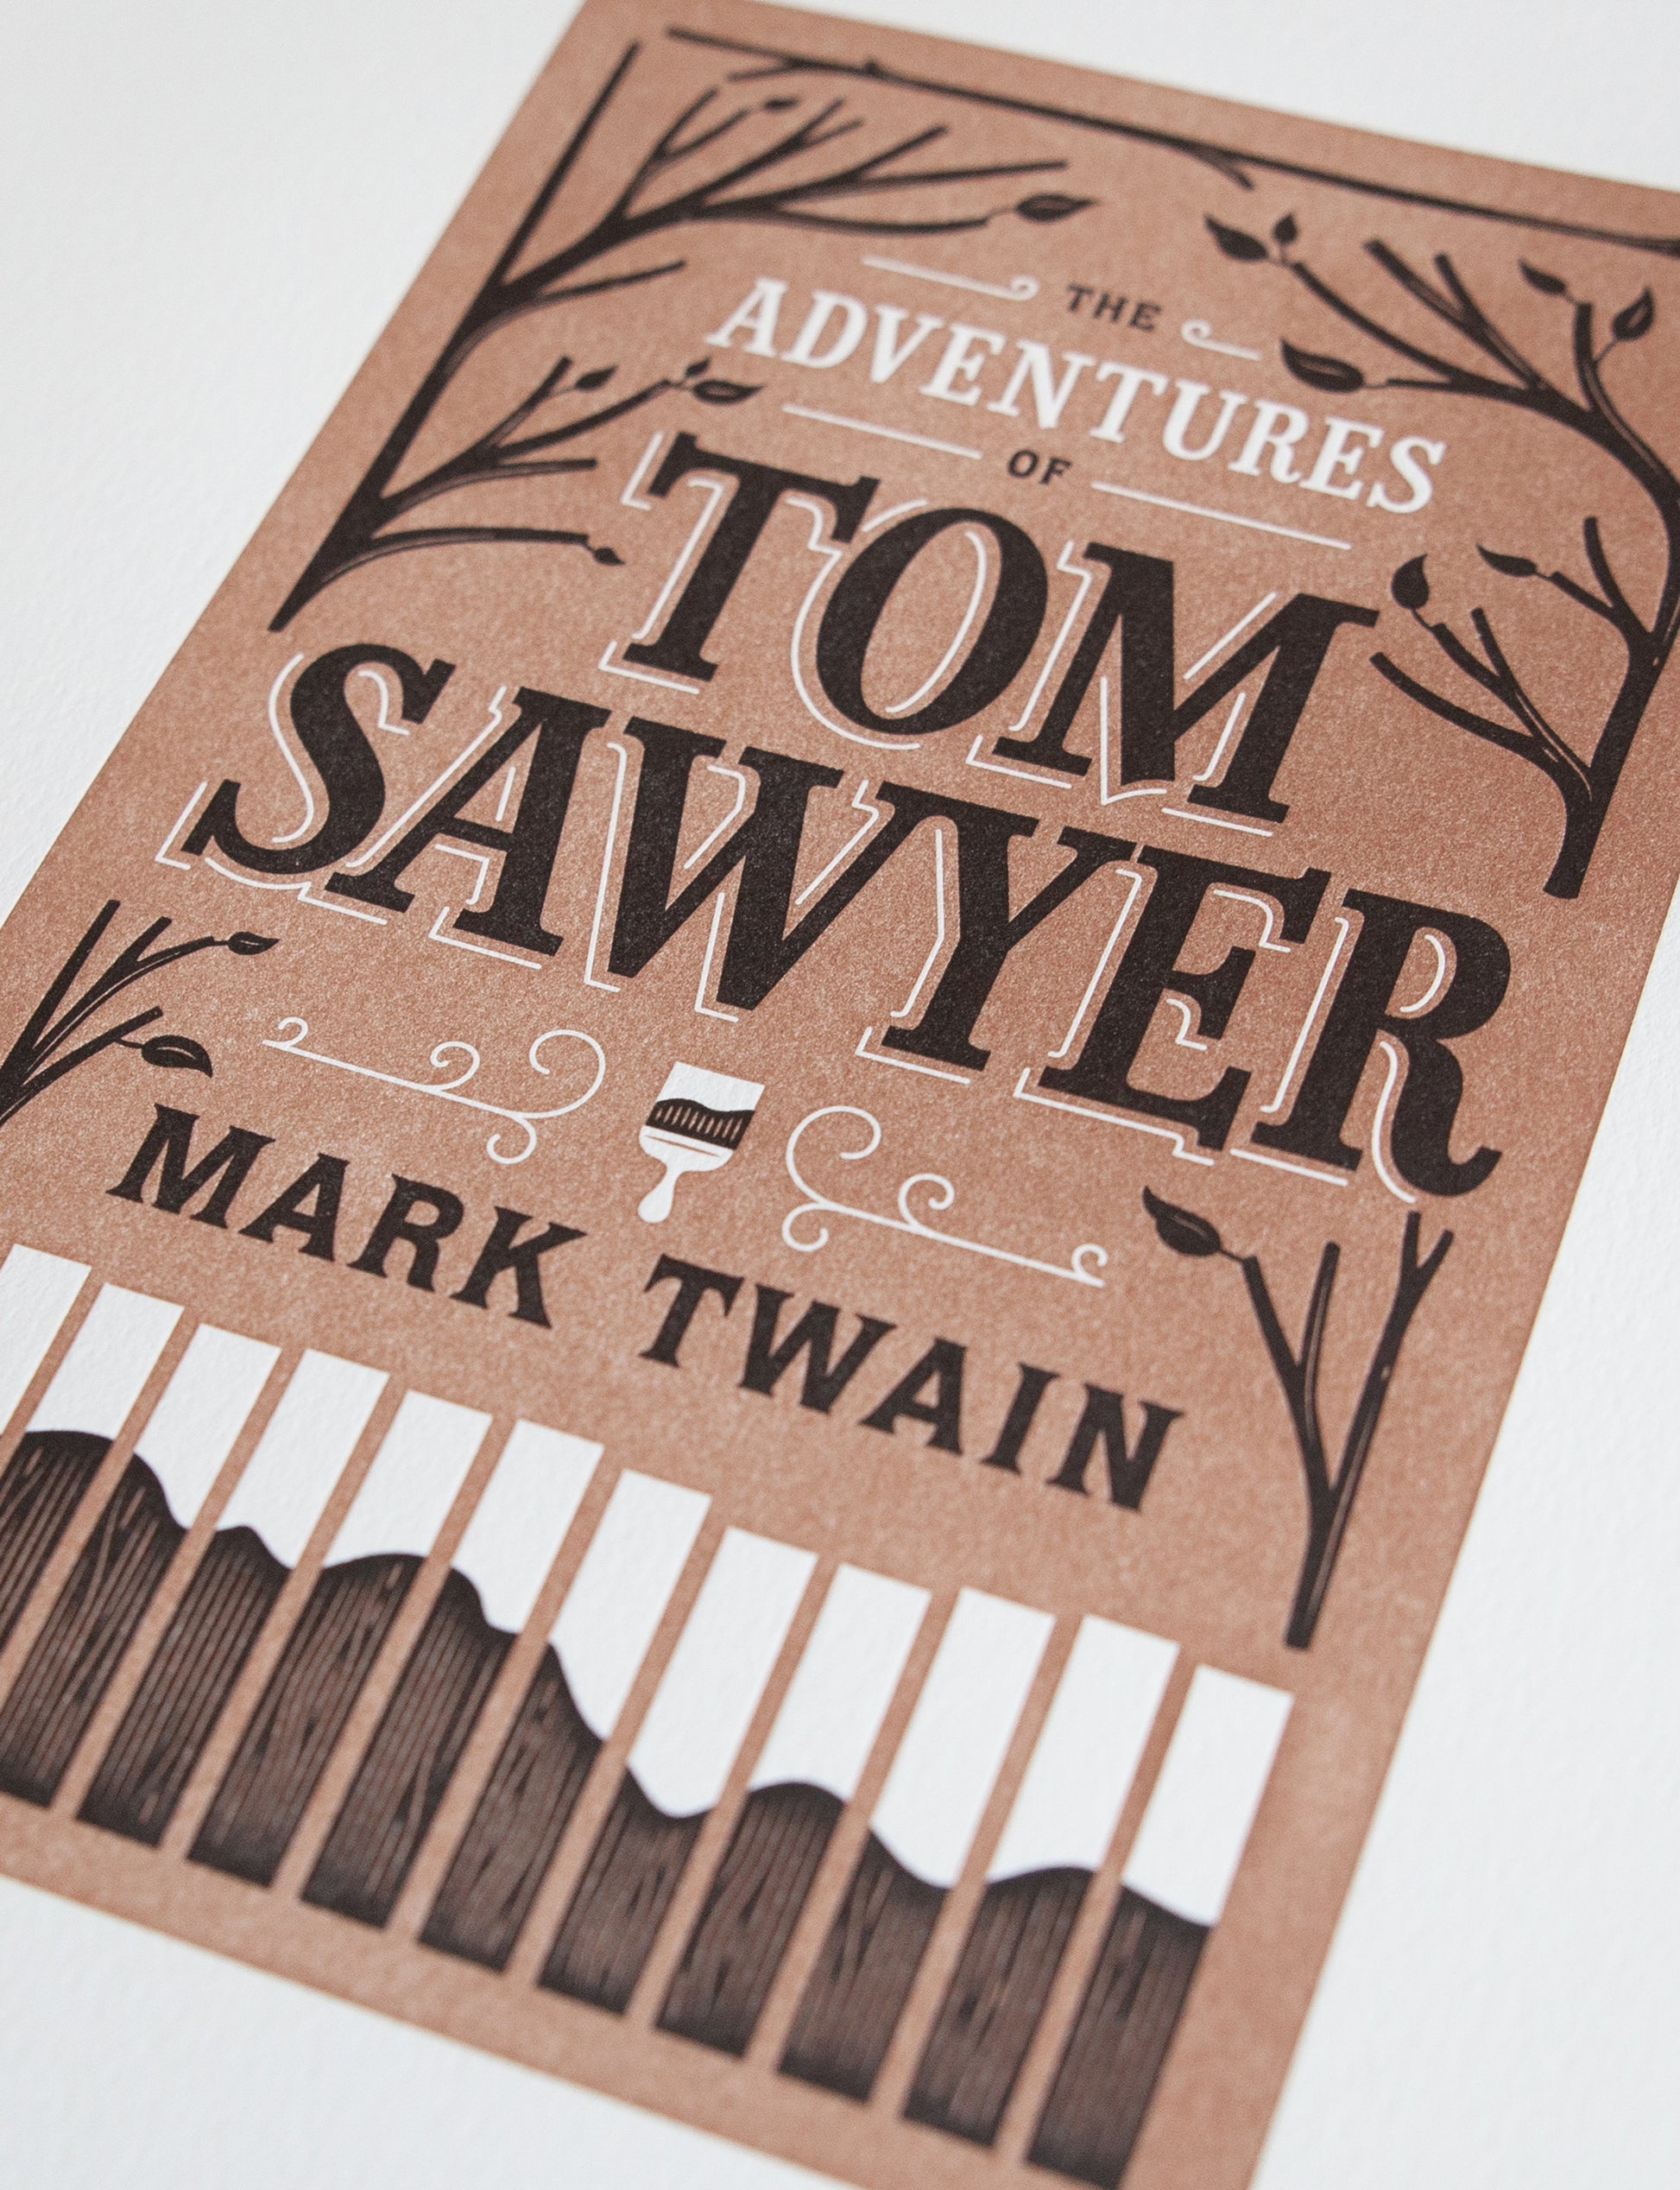 Close-up of a 2-color letterpress print in brown and black. Printed artwork is an illustrated book cover of The Adventures of Tom Sawyer including custom hand lettering.